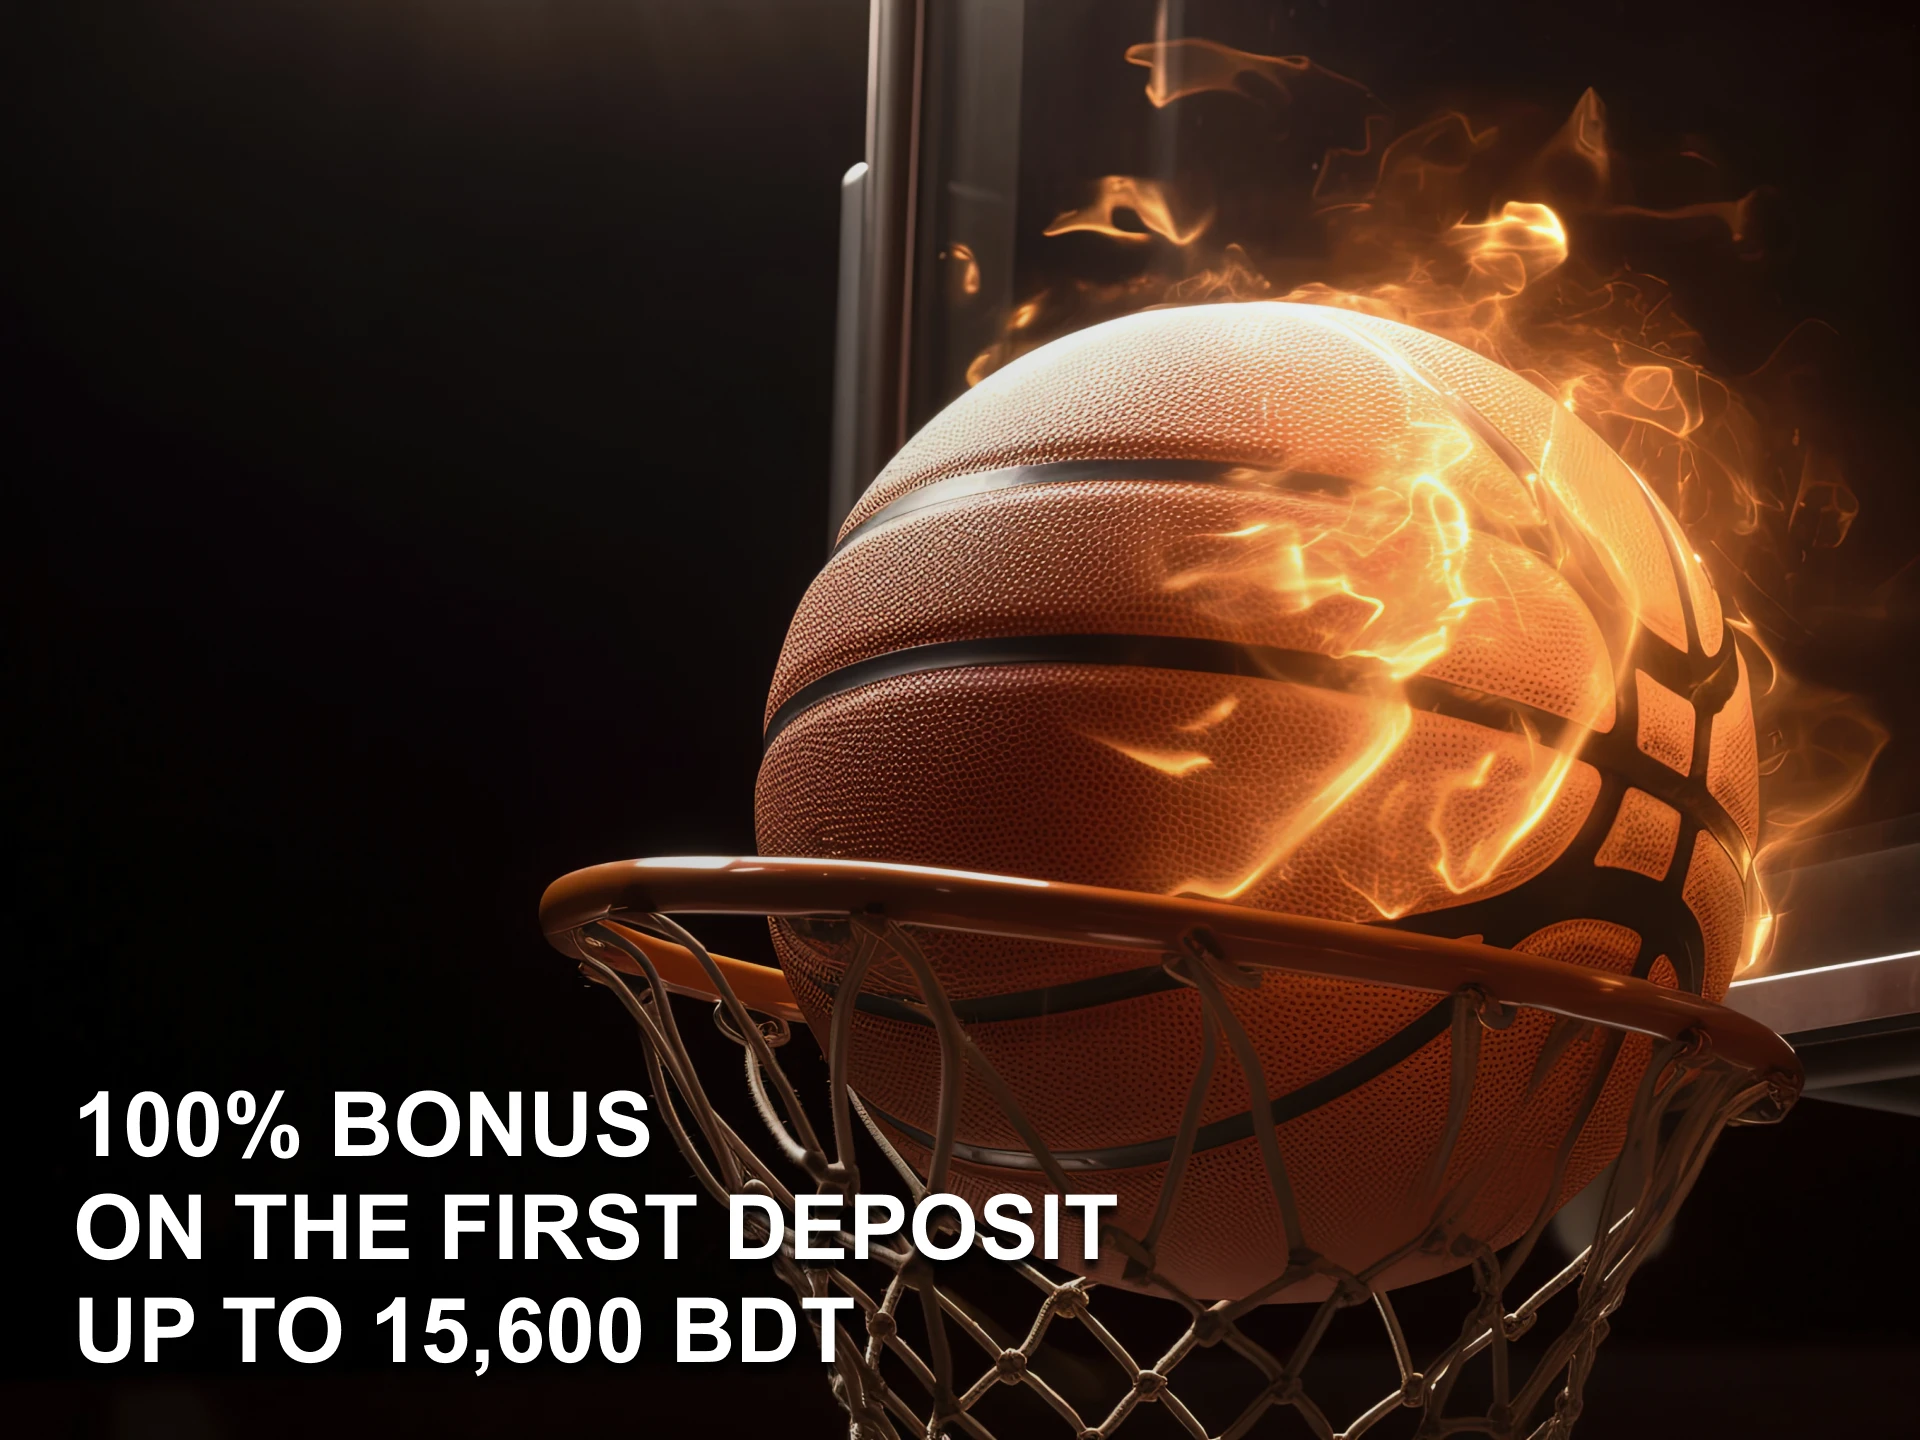 For new users, there is a welcome bonus of up to 15,600 BDT available.